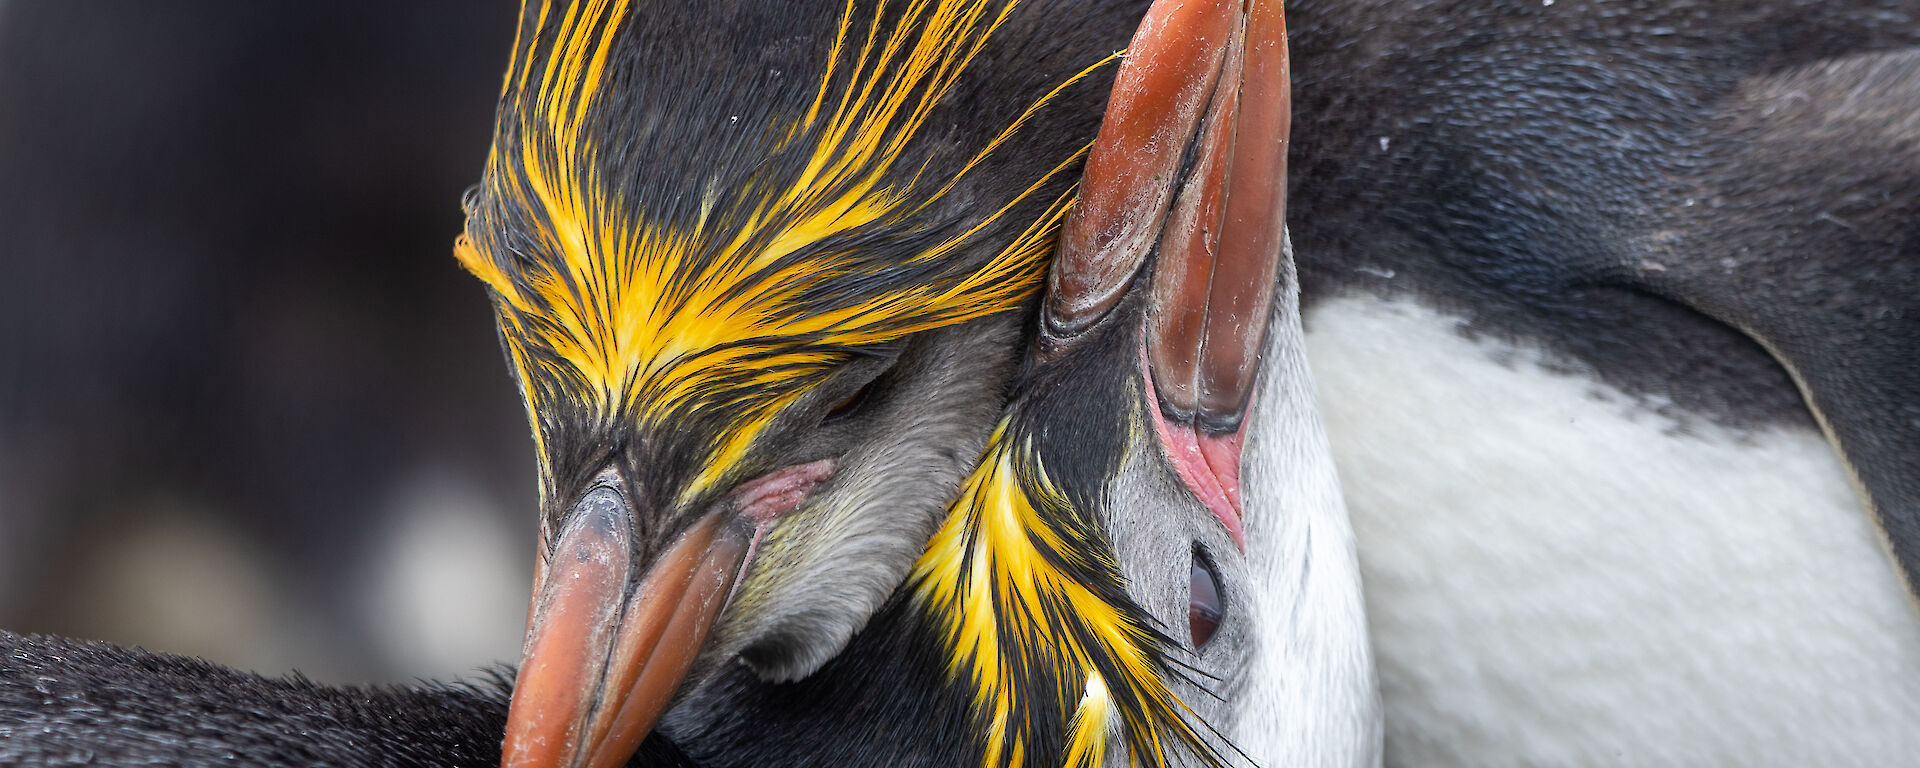 Two royal penguins embracing in a hug with their heads